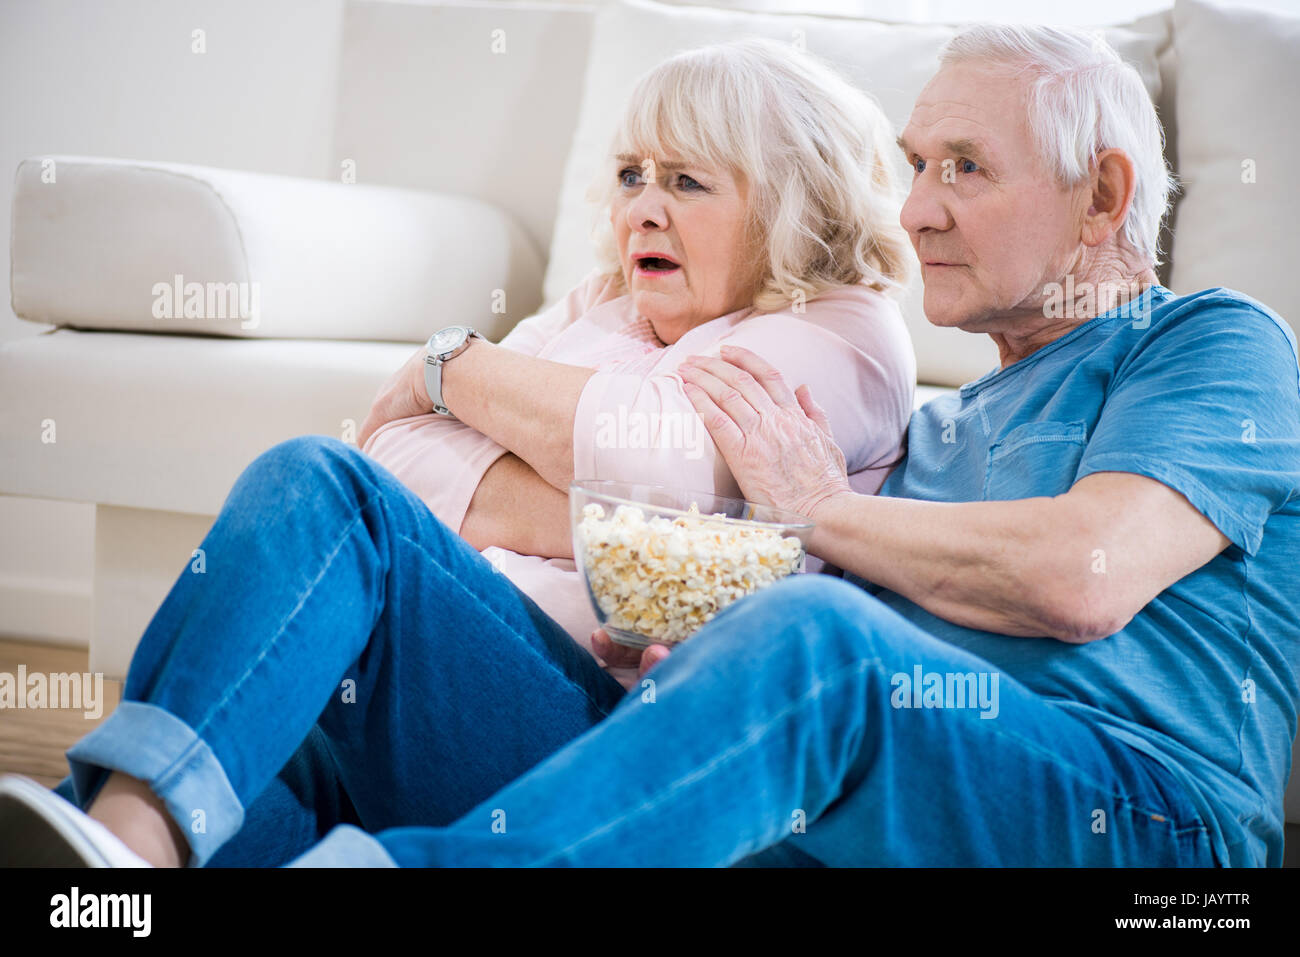 senior couple sitting on floor with popcorn and watching tv, frightened woman. Stock Photo